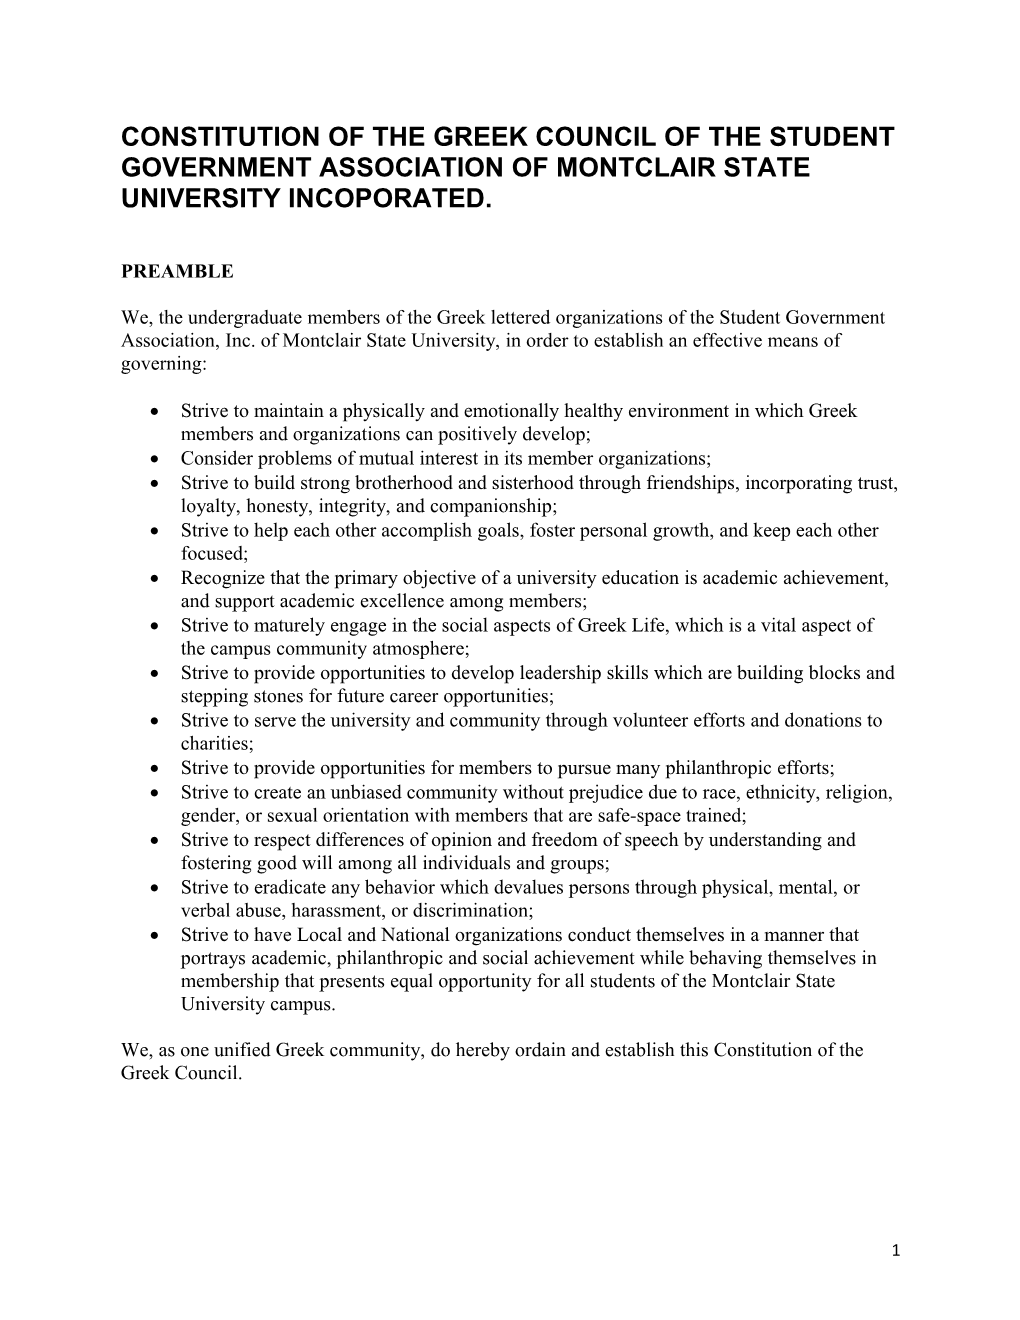 Constitution of the Greek Council of the Student Government Association of Montclair State